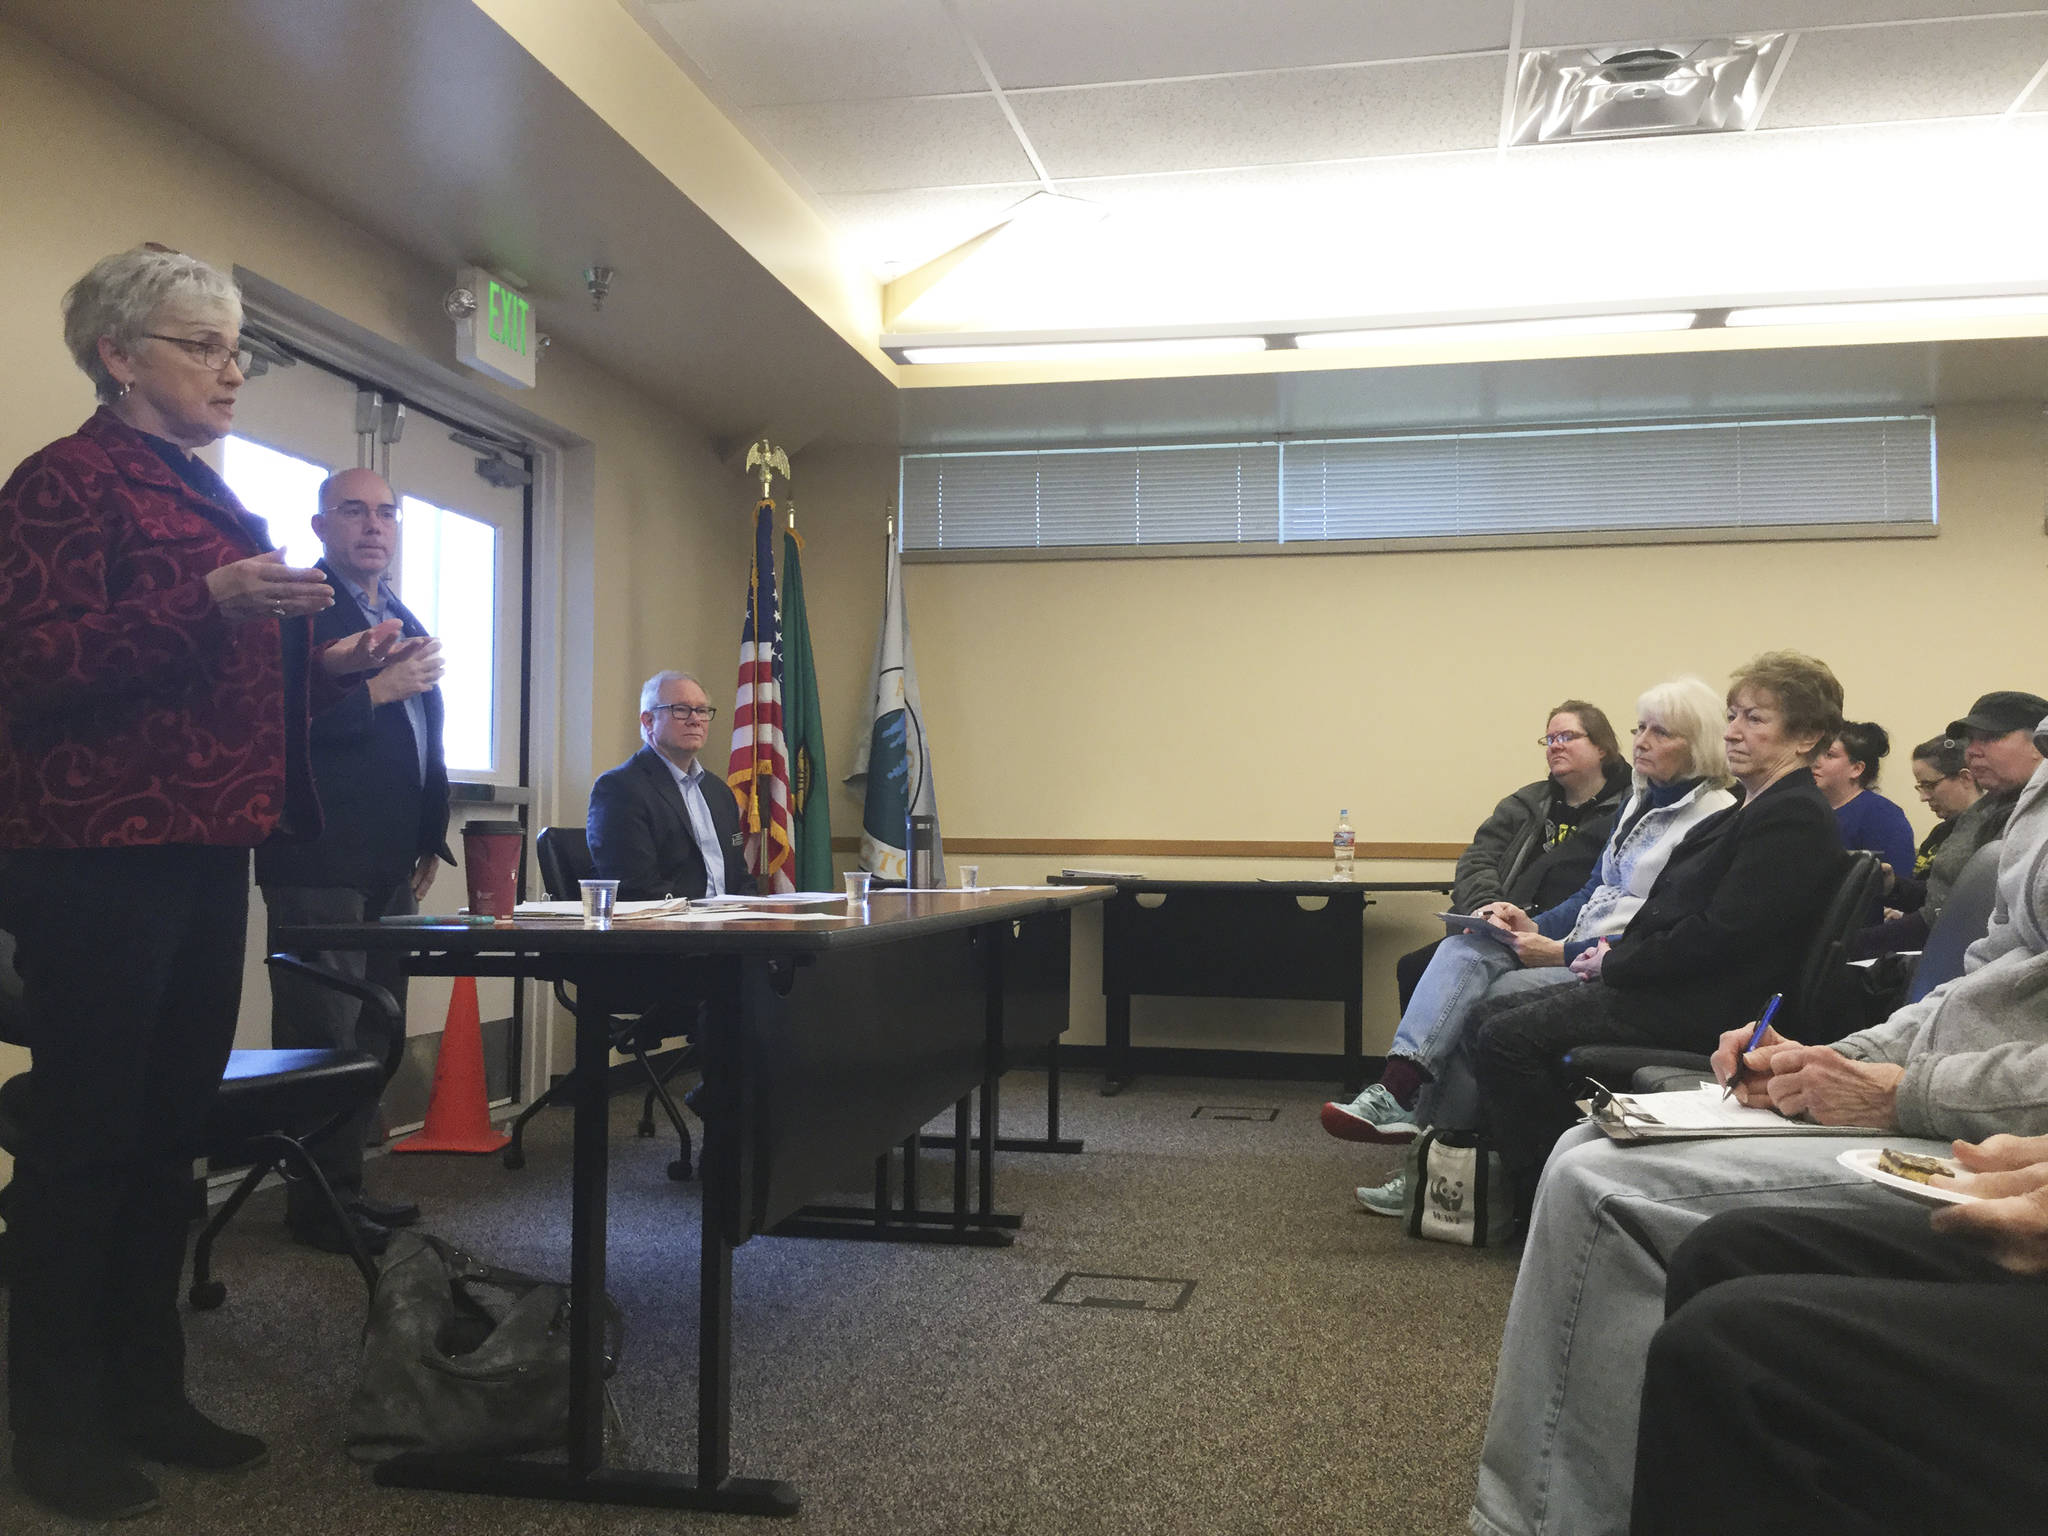 39th district lawmakers discuss state issues at mid-session town hall talk